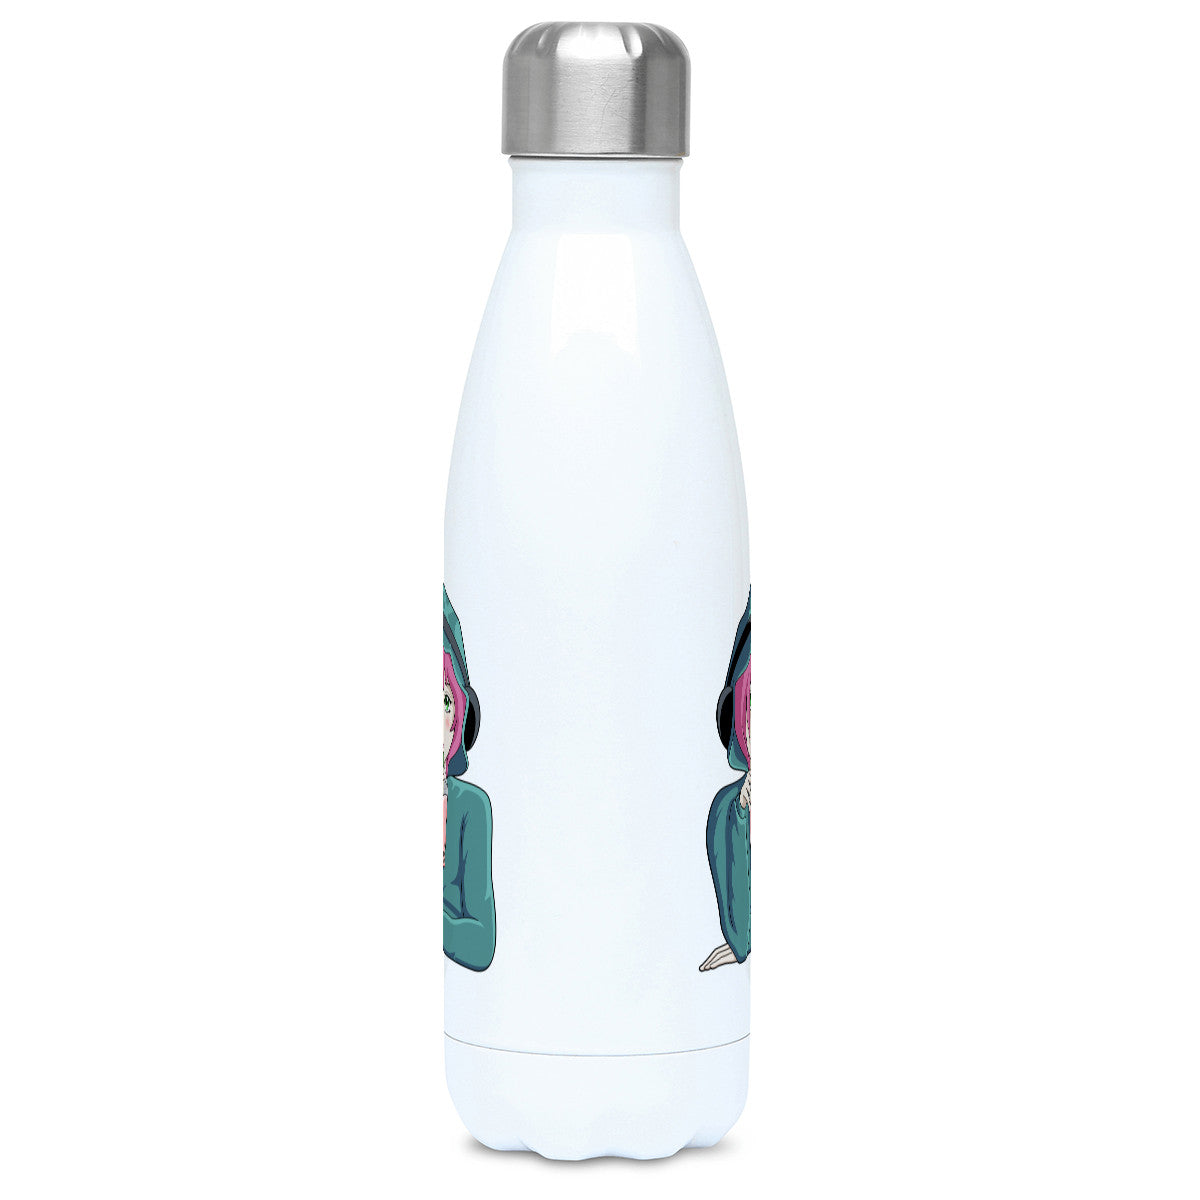 Anime girl wearing headphones and drinking boba design on a white metal insulated drinks bottle. Side angle